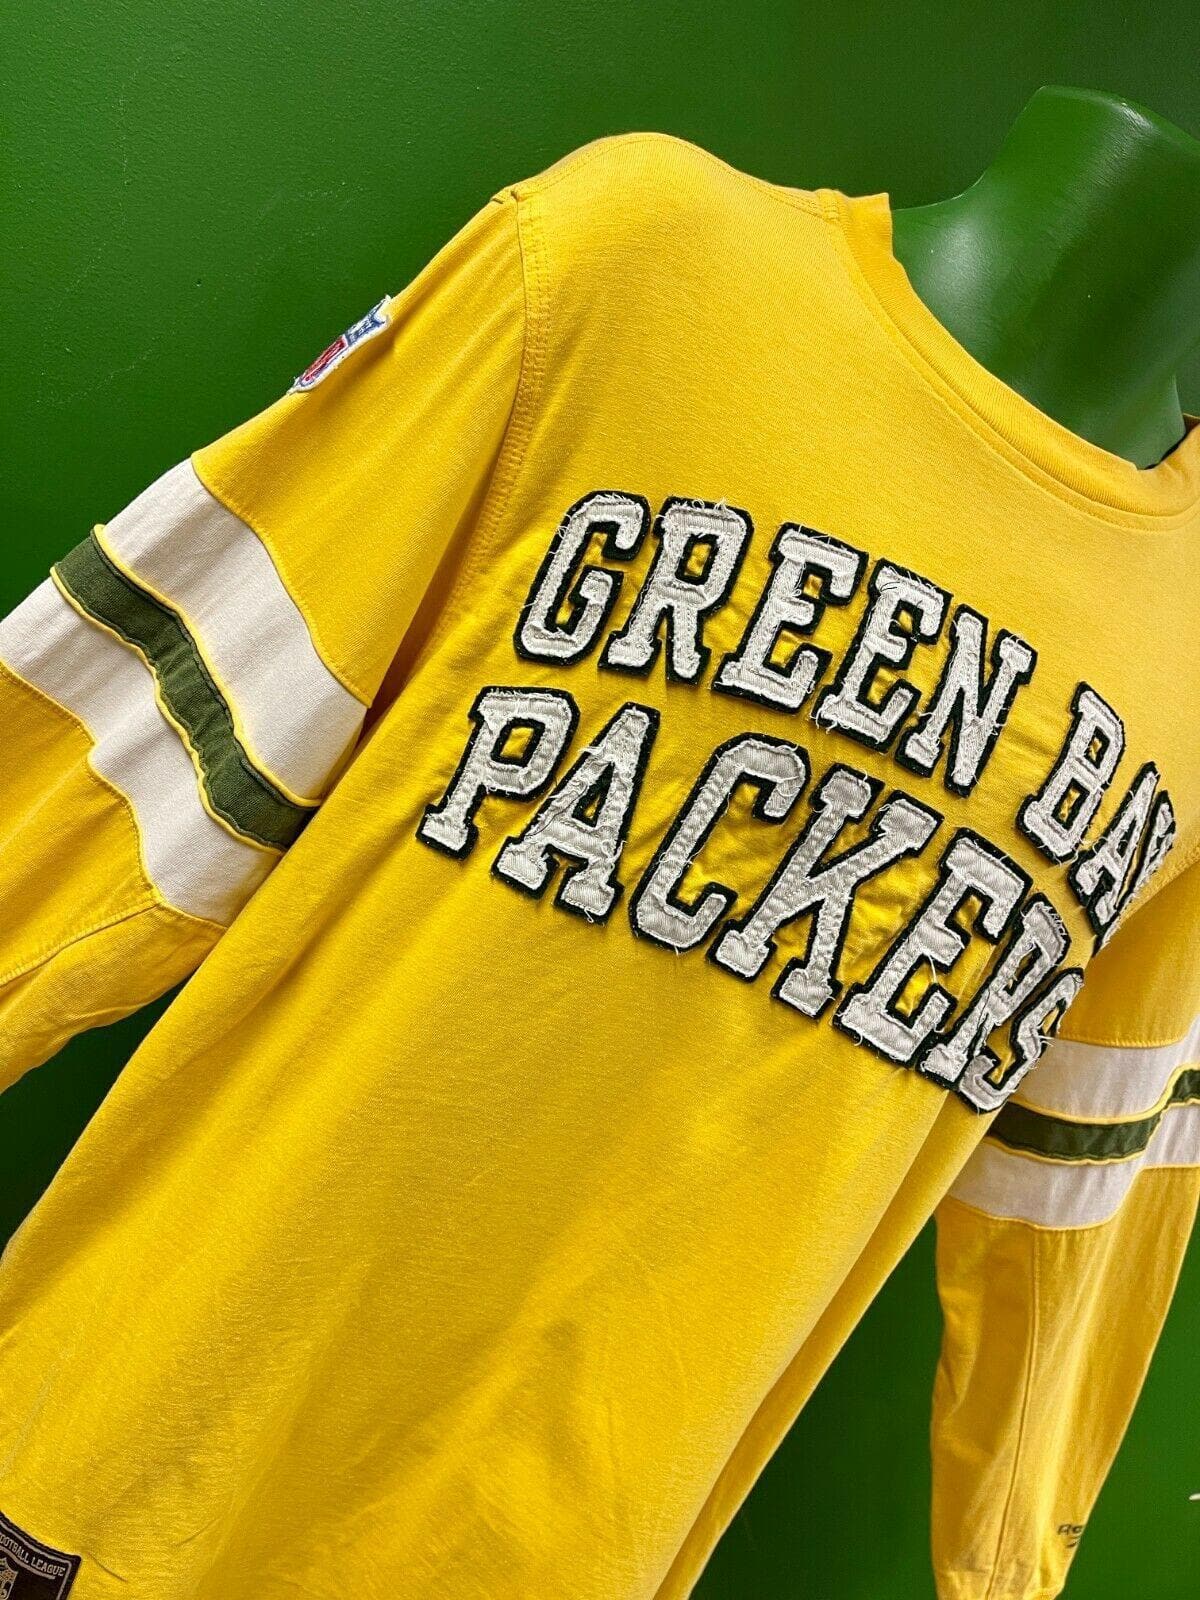 NFL Green Bay Packers Reebok Vintage Collection L-S T-Shirt Men's Small